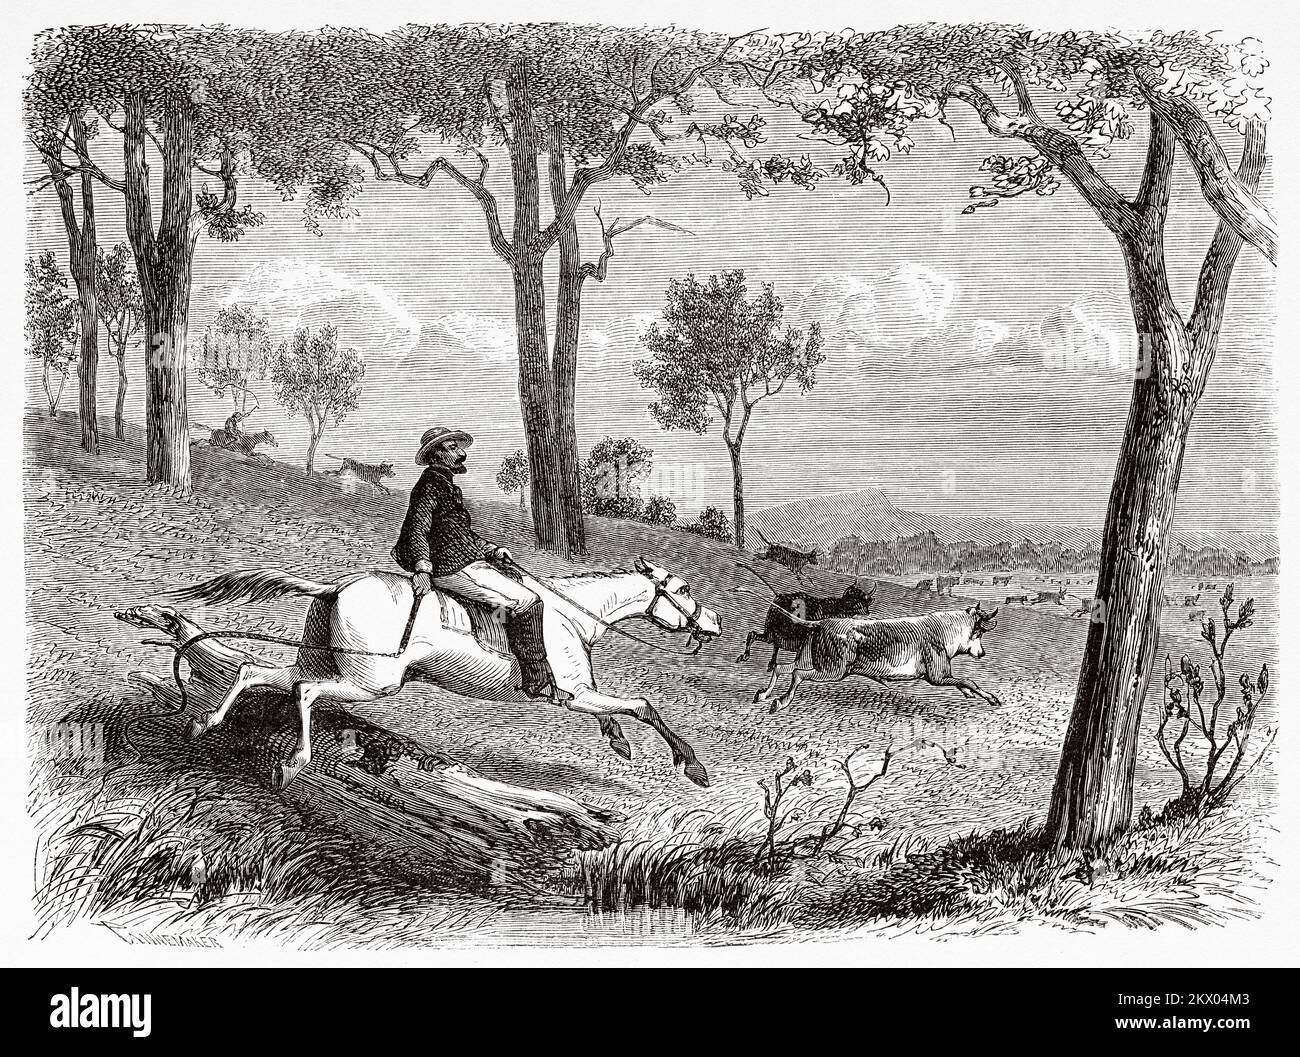 Cattle ranchers herding their herds of cattle mounted on horseback, Australian states of Victoria, Australia. Souvenir of a French squatter in Australia by H. de Castella 1854-1856 Stock Photo